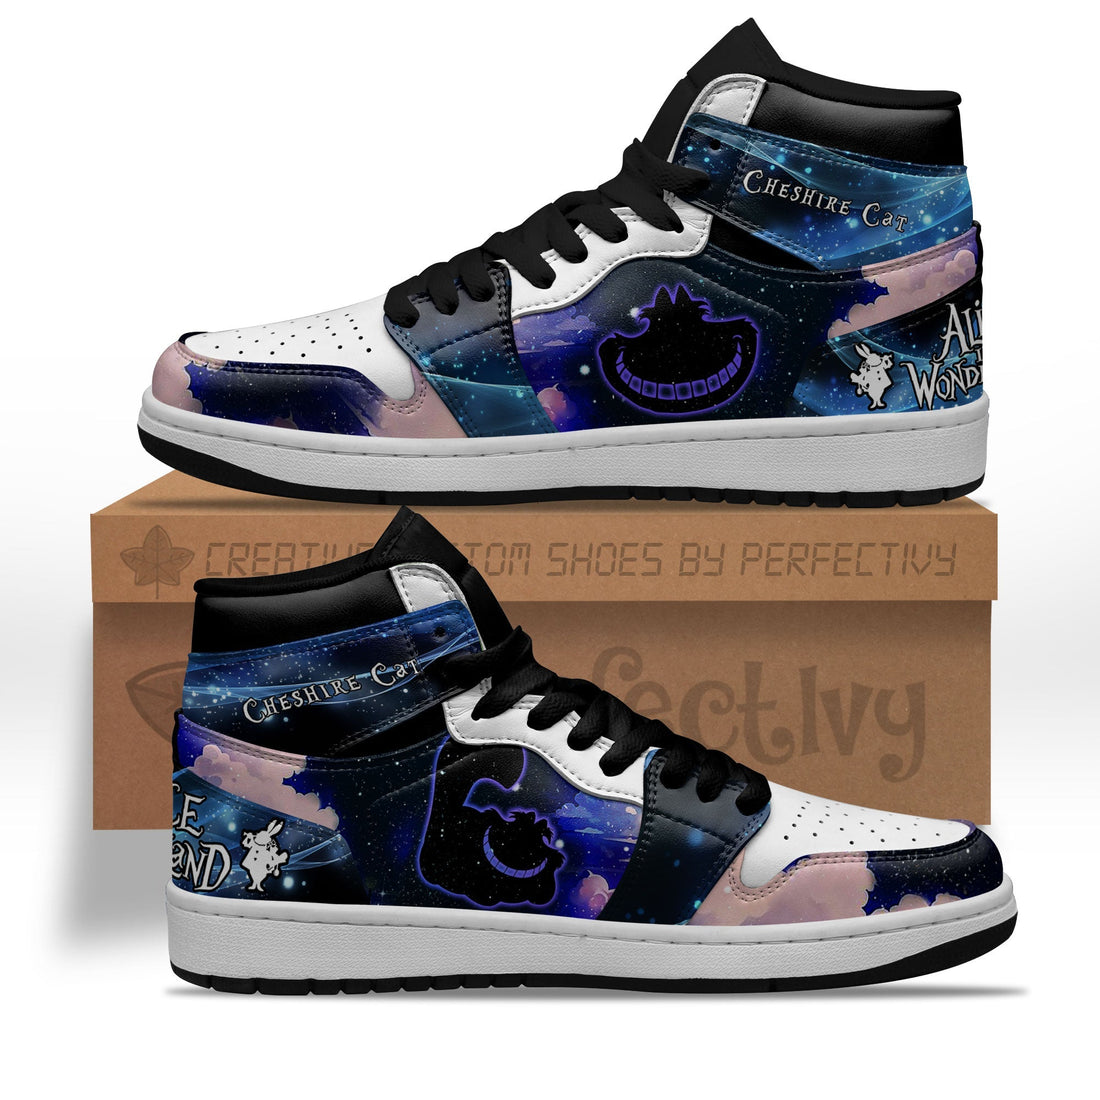 Cheshire Cat Silhouette J1 Shoes Custom For Fans Sneakers PT10-Gear Wanta